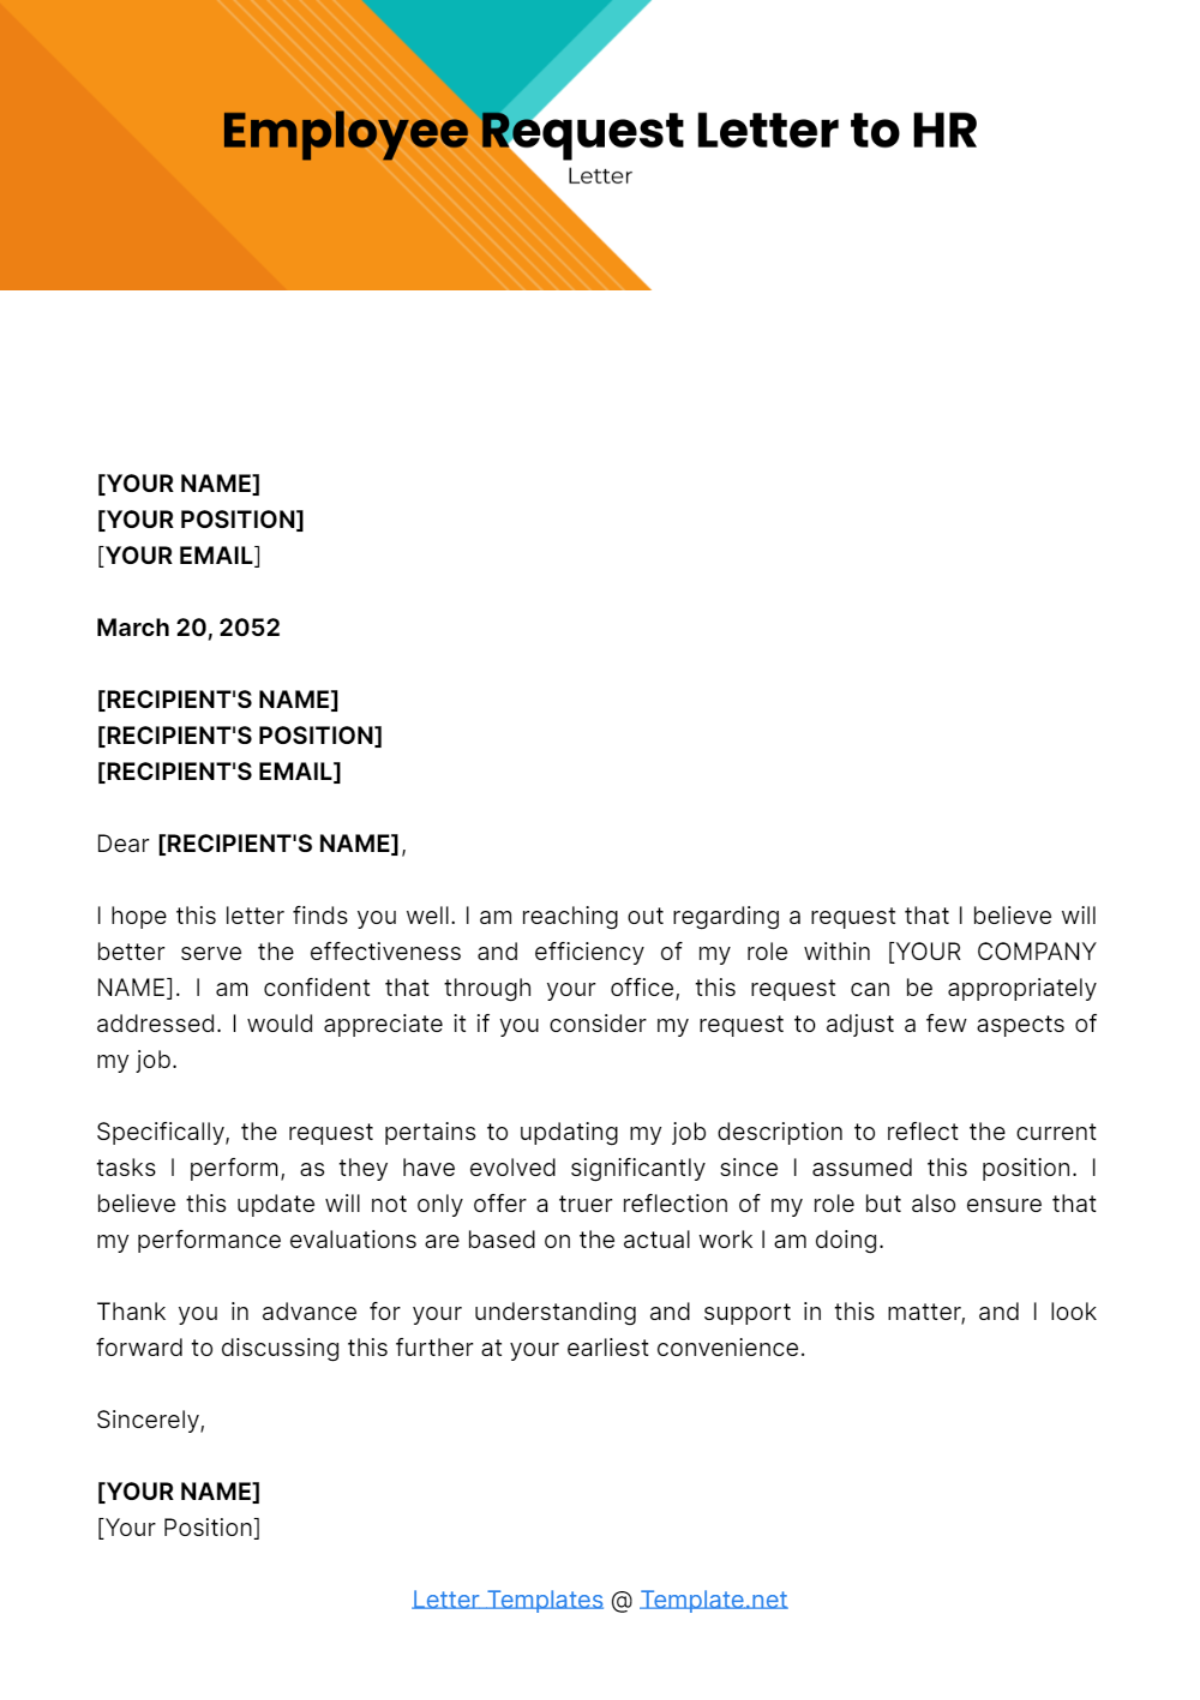 Free Employee Request Letter to HR Template